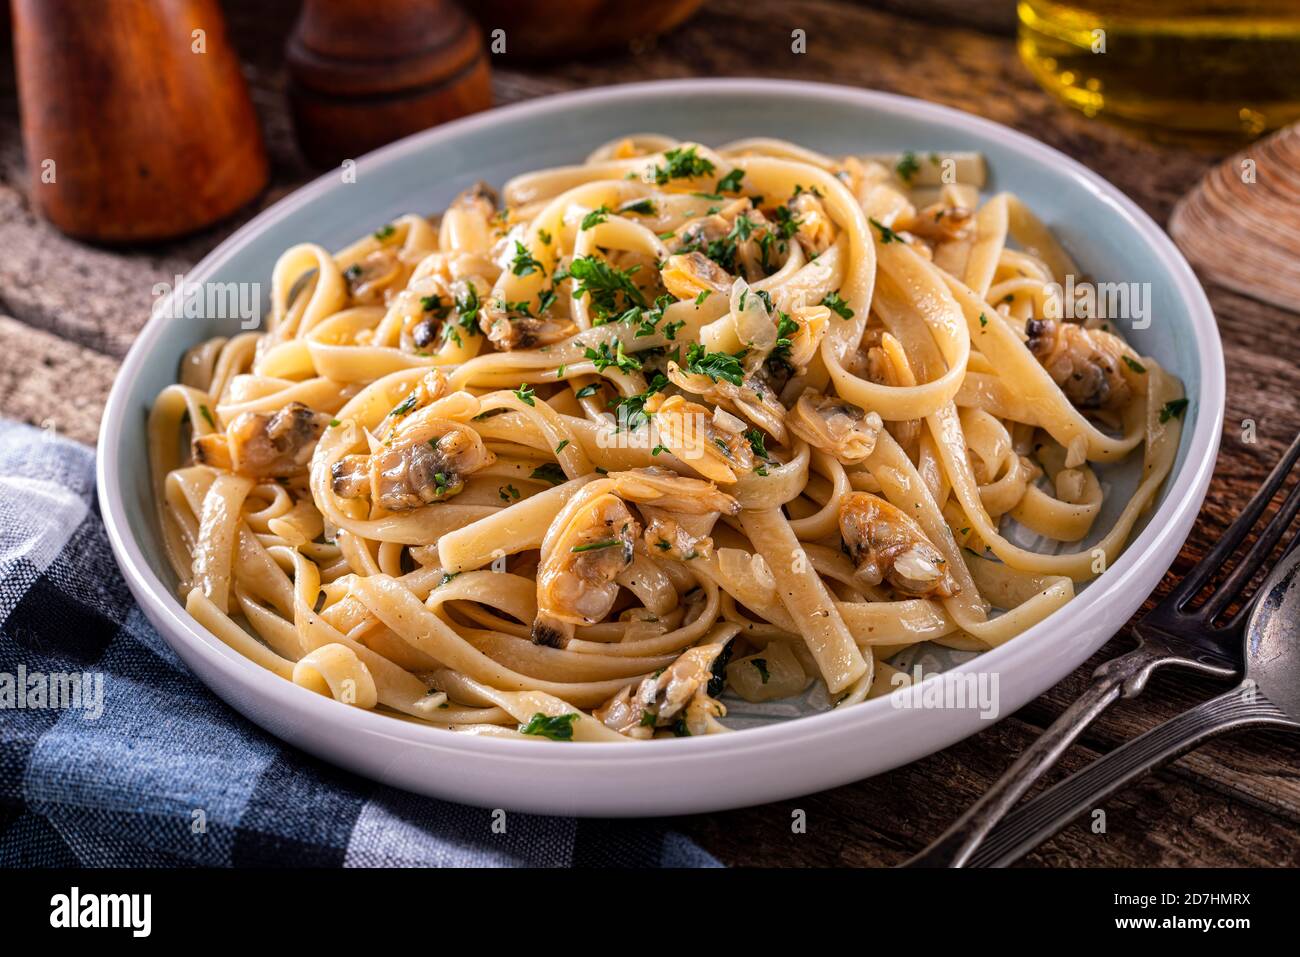 A plate of delicious pasta with clam sauce with onion, garlic, olive oil, parsley and fresh clams. Stock Photo